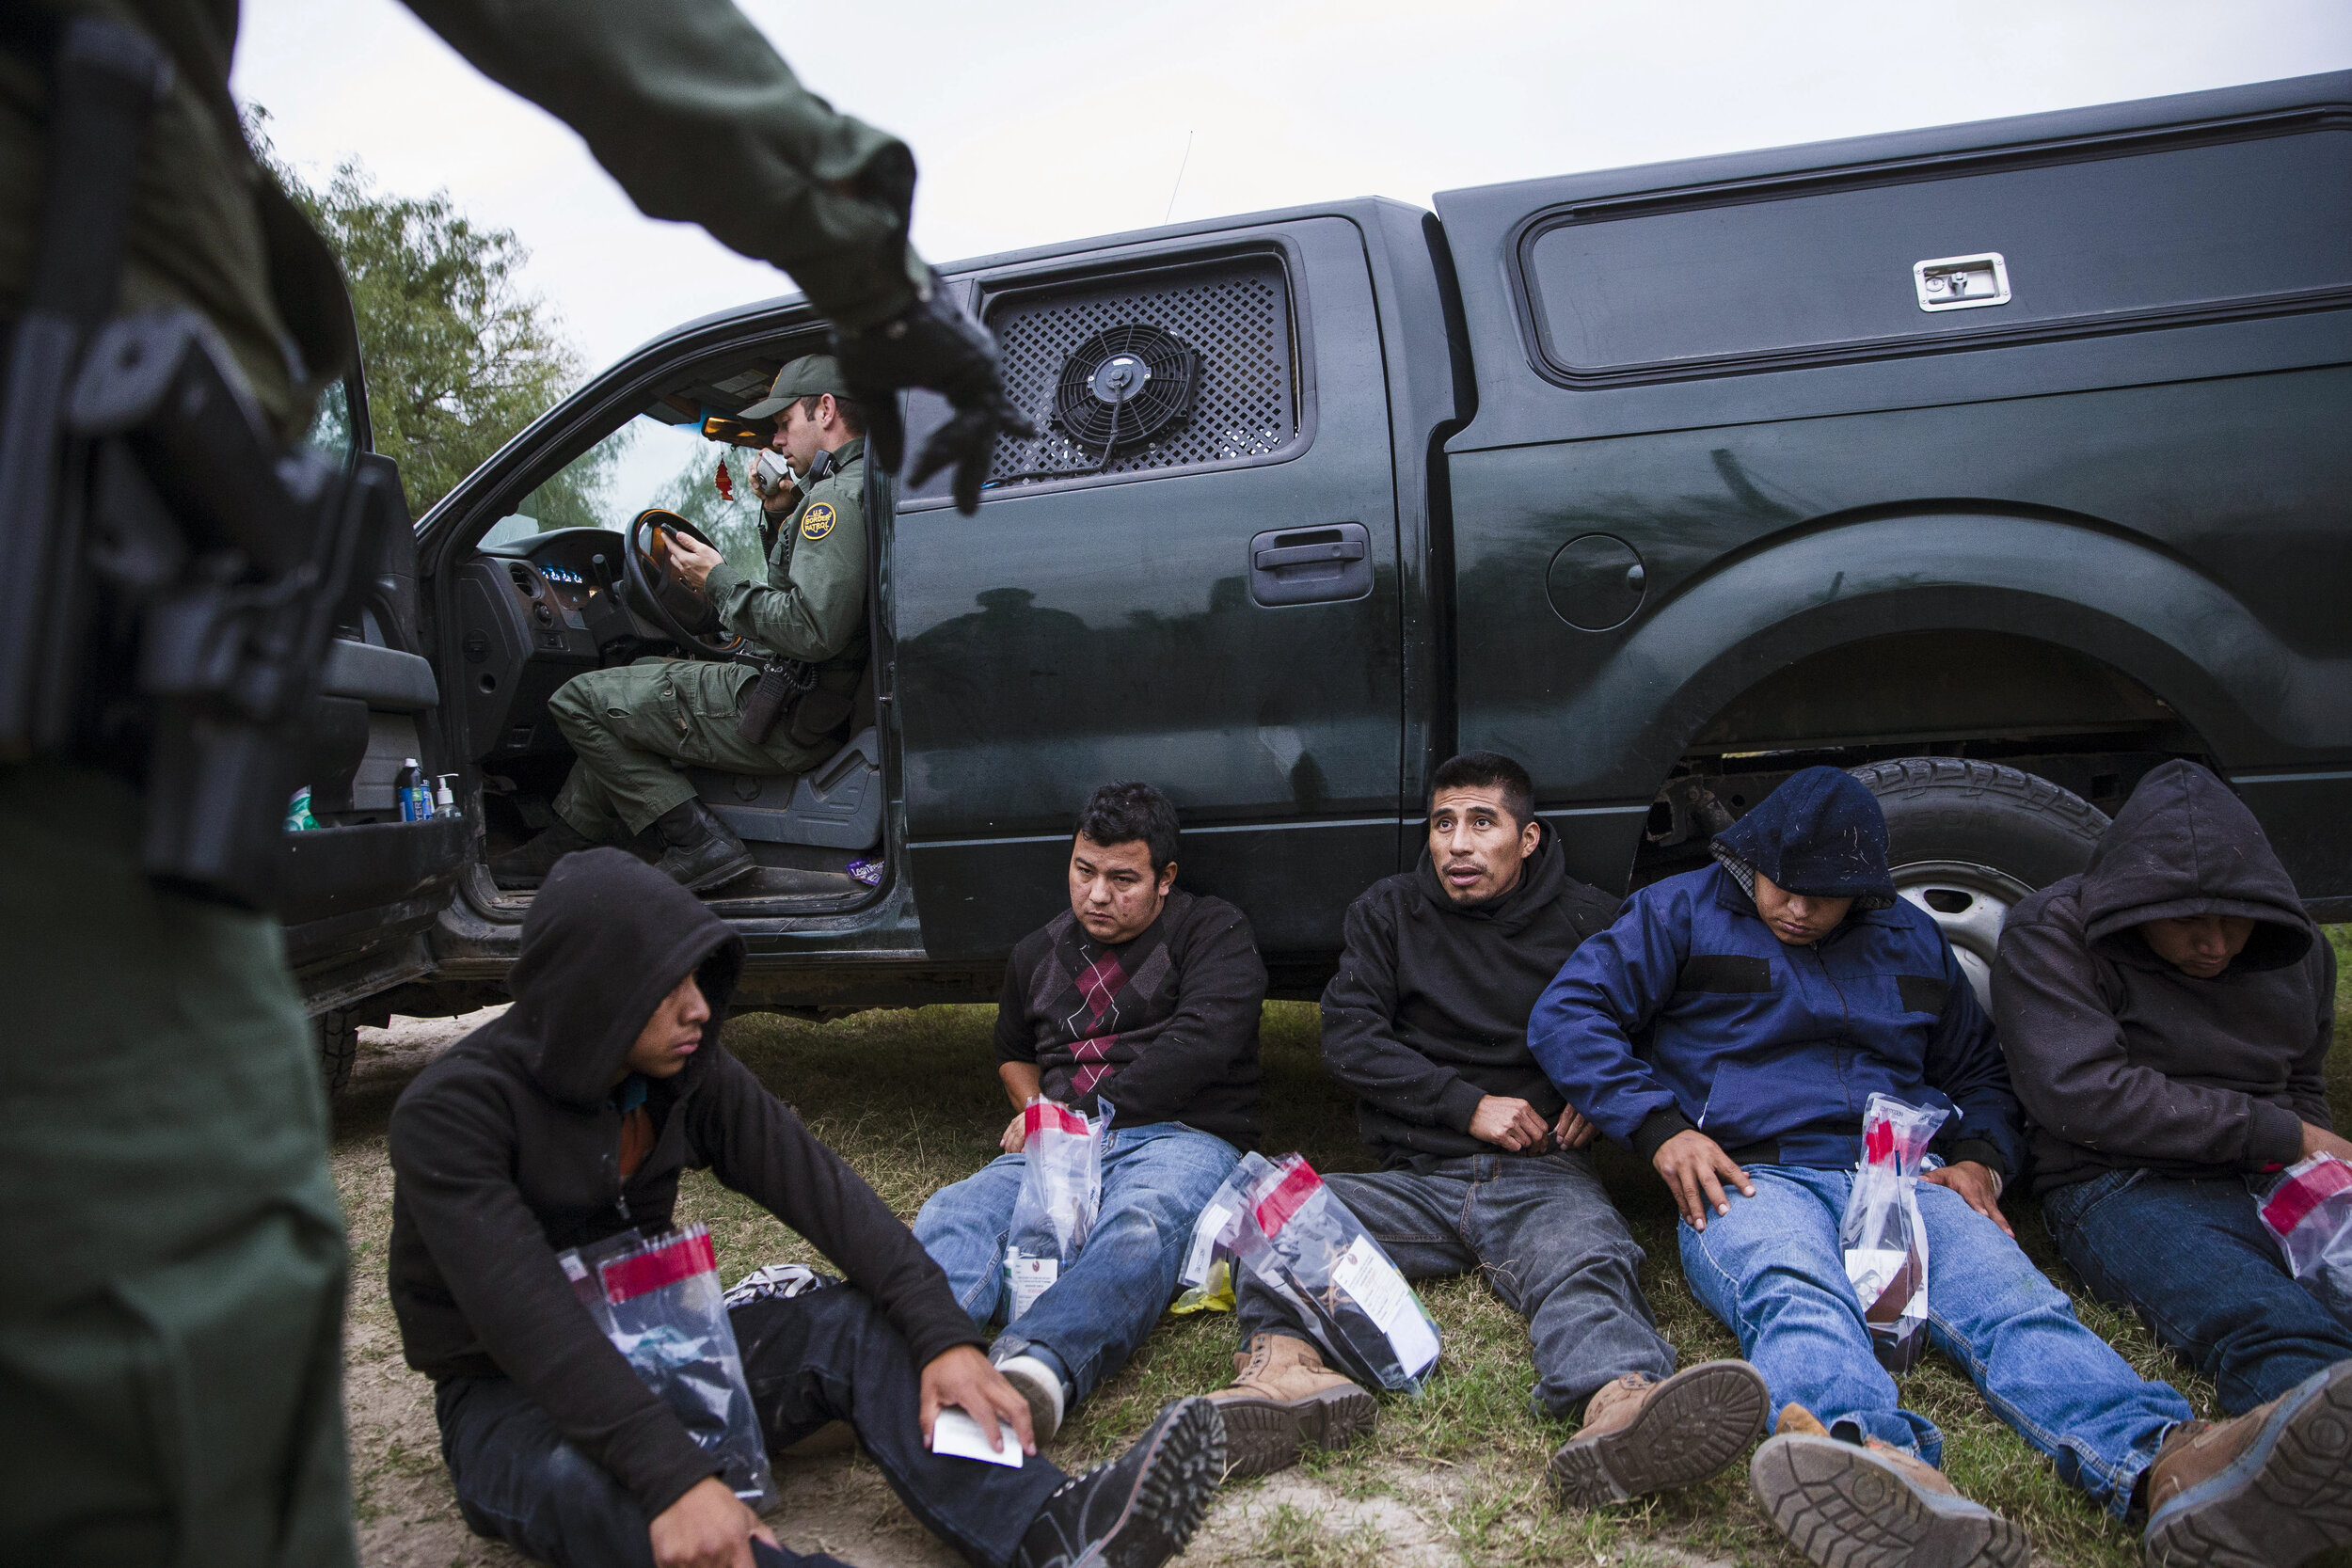  A group of immigrants from Guatemala, Honduras and Mexico are taken into custody by Border Patrol Agents after being apprehended crossing the border from Mexico into the U.S. on Wednesday, Dec. 5, 2018, near McAllen, TX.   [Amanda Voisard/AMERICAN-S